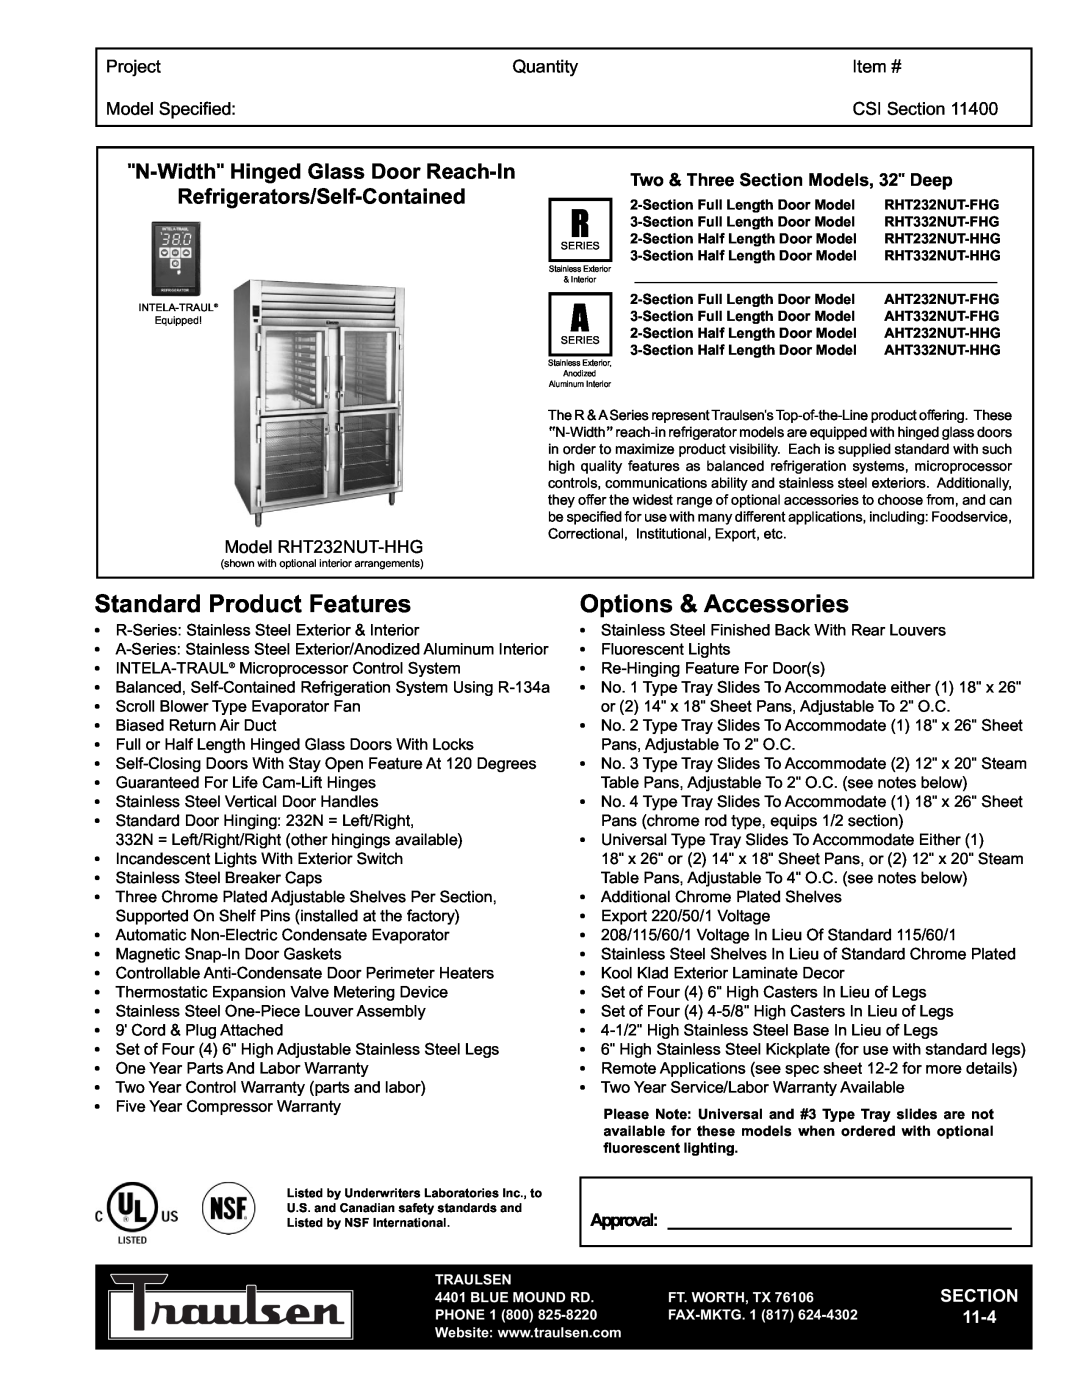 Traulsen RHT232NUT-HHG warranty N-Width Hinged Glass Door Reach-In, Refrigerators/Self-Contained, Project, Quantity, 11-4 